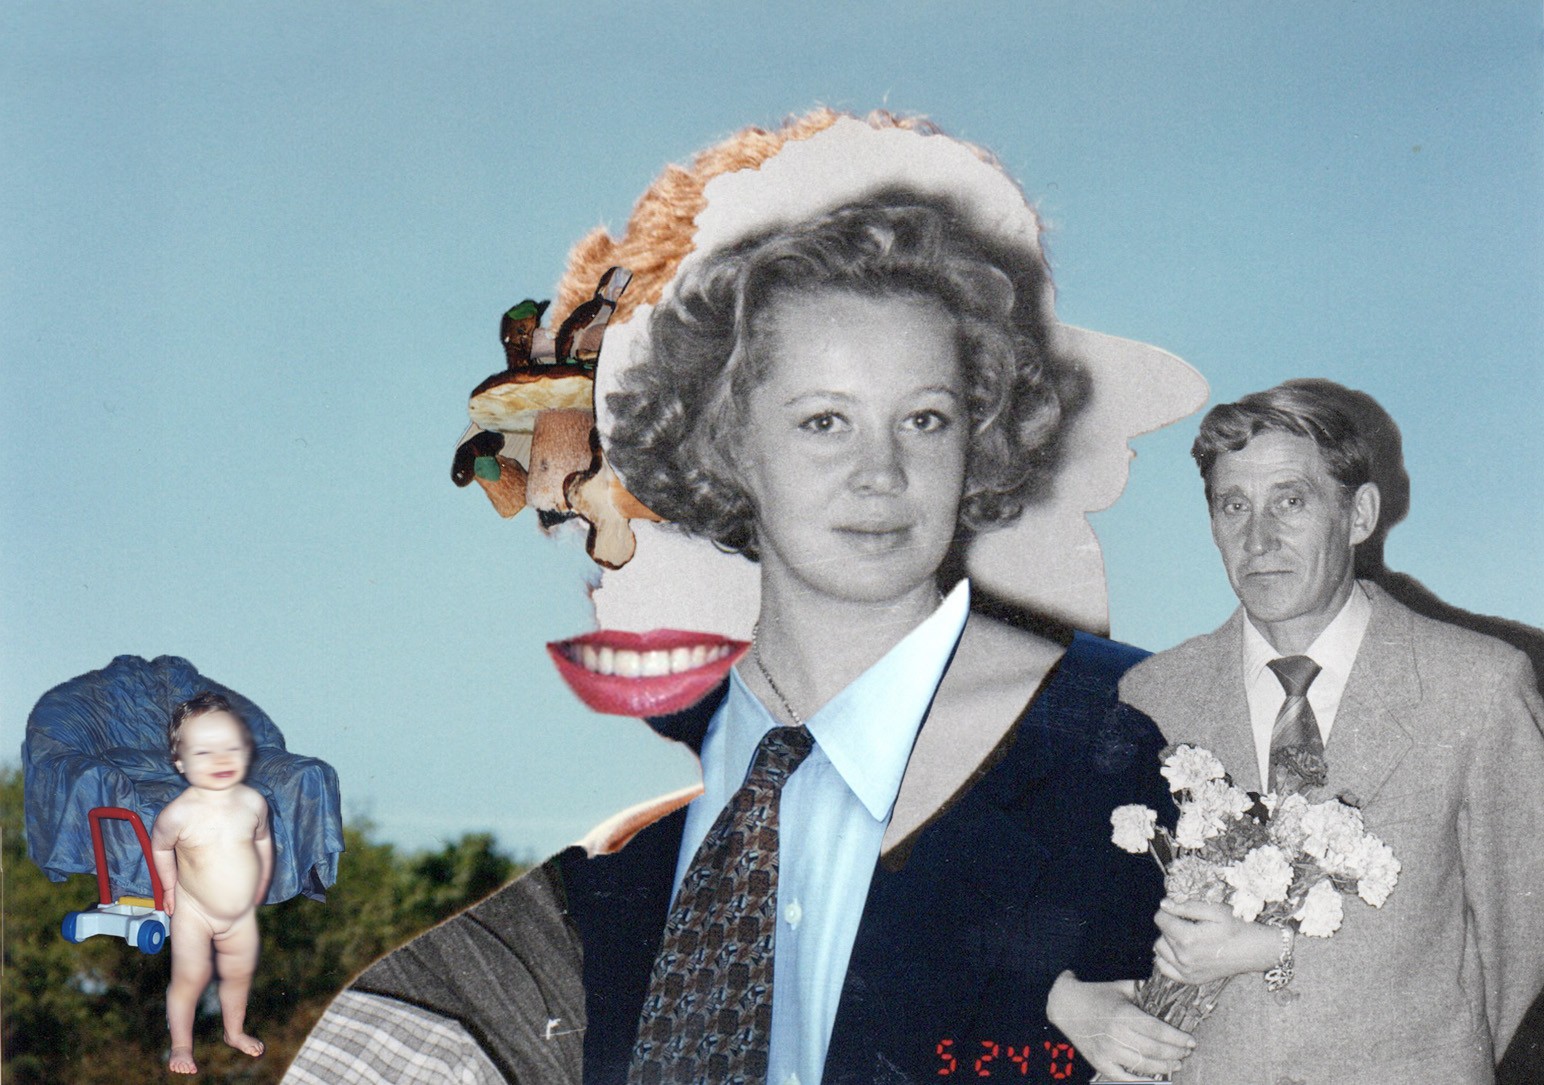 A photoshop collage of a family photo, superimposed over an image of a woman.